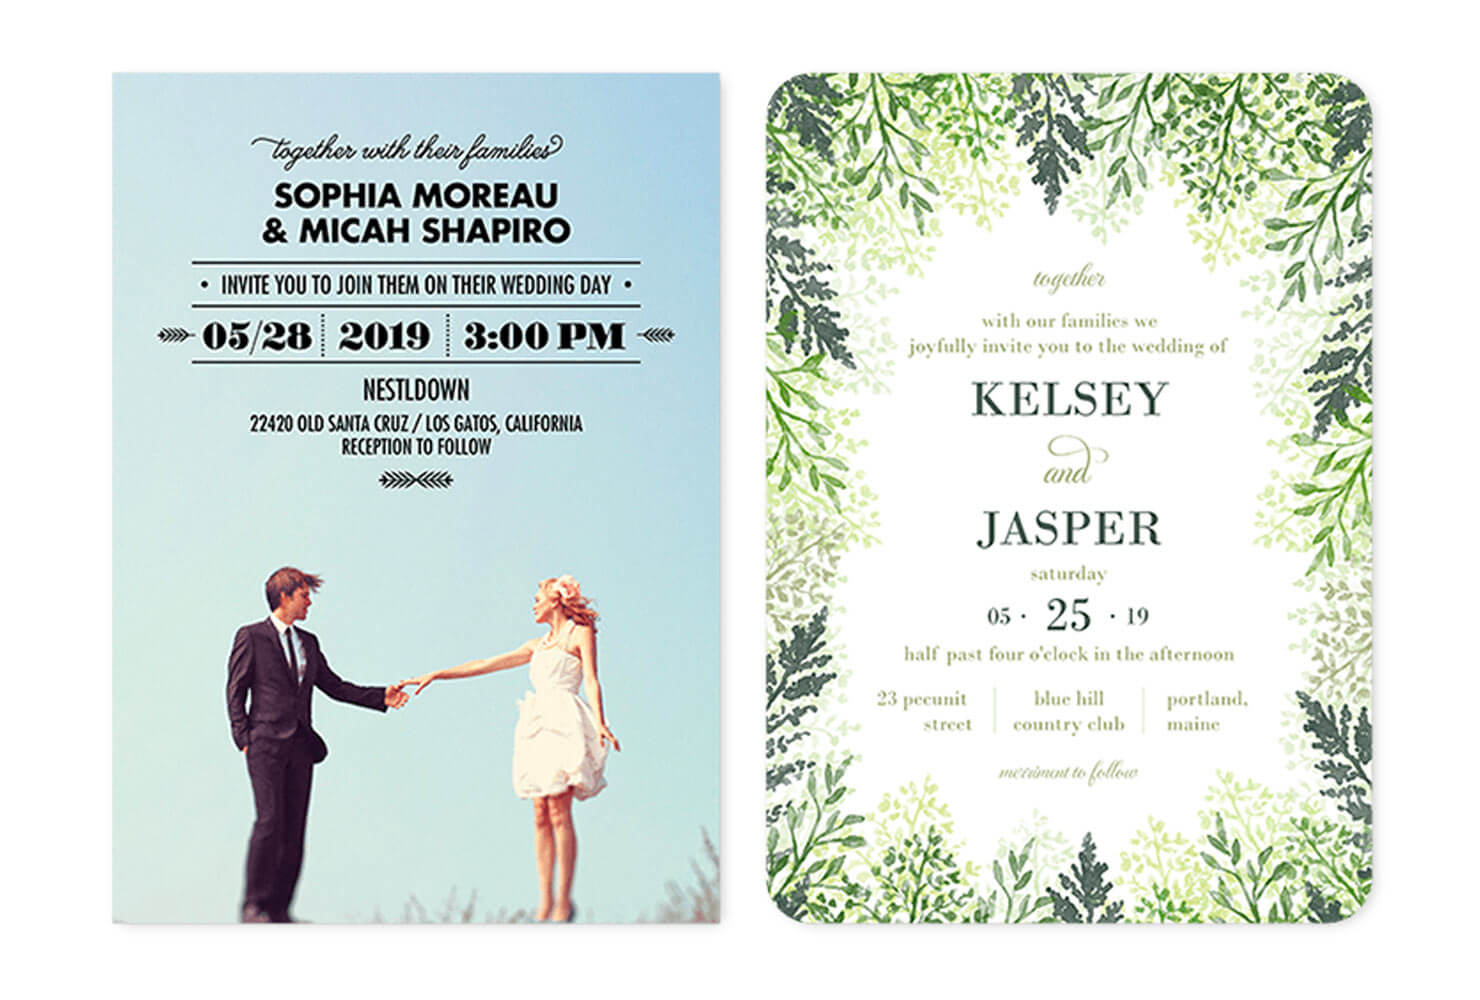 35+ Wedding Invitation Wording Examples 2019 | Shutterfly Intended For Church Wedding Invitation Card Template